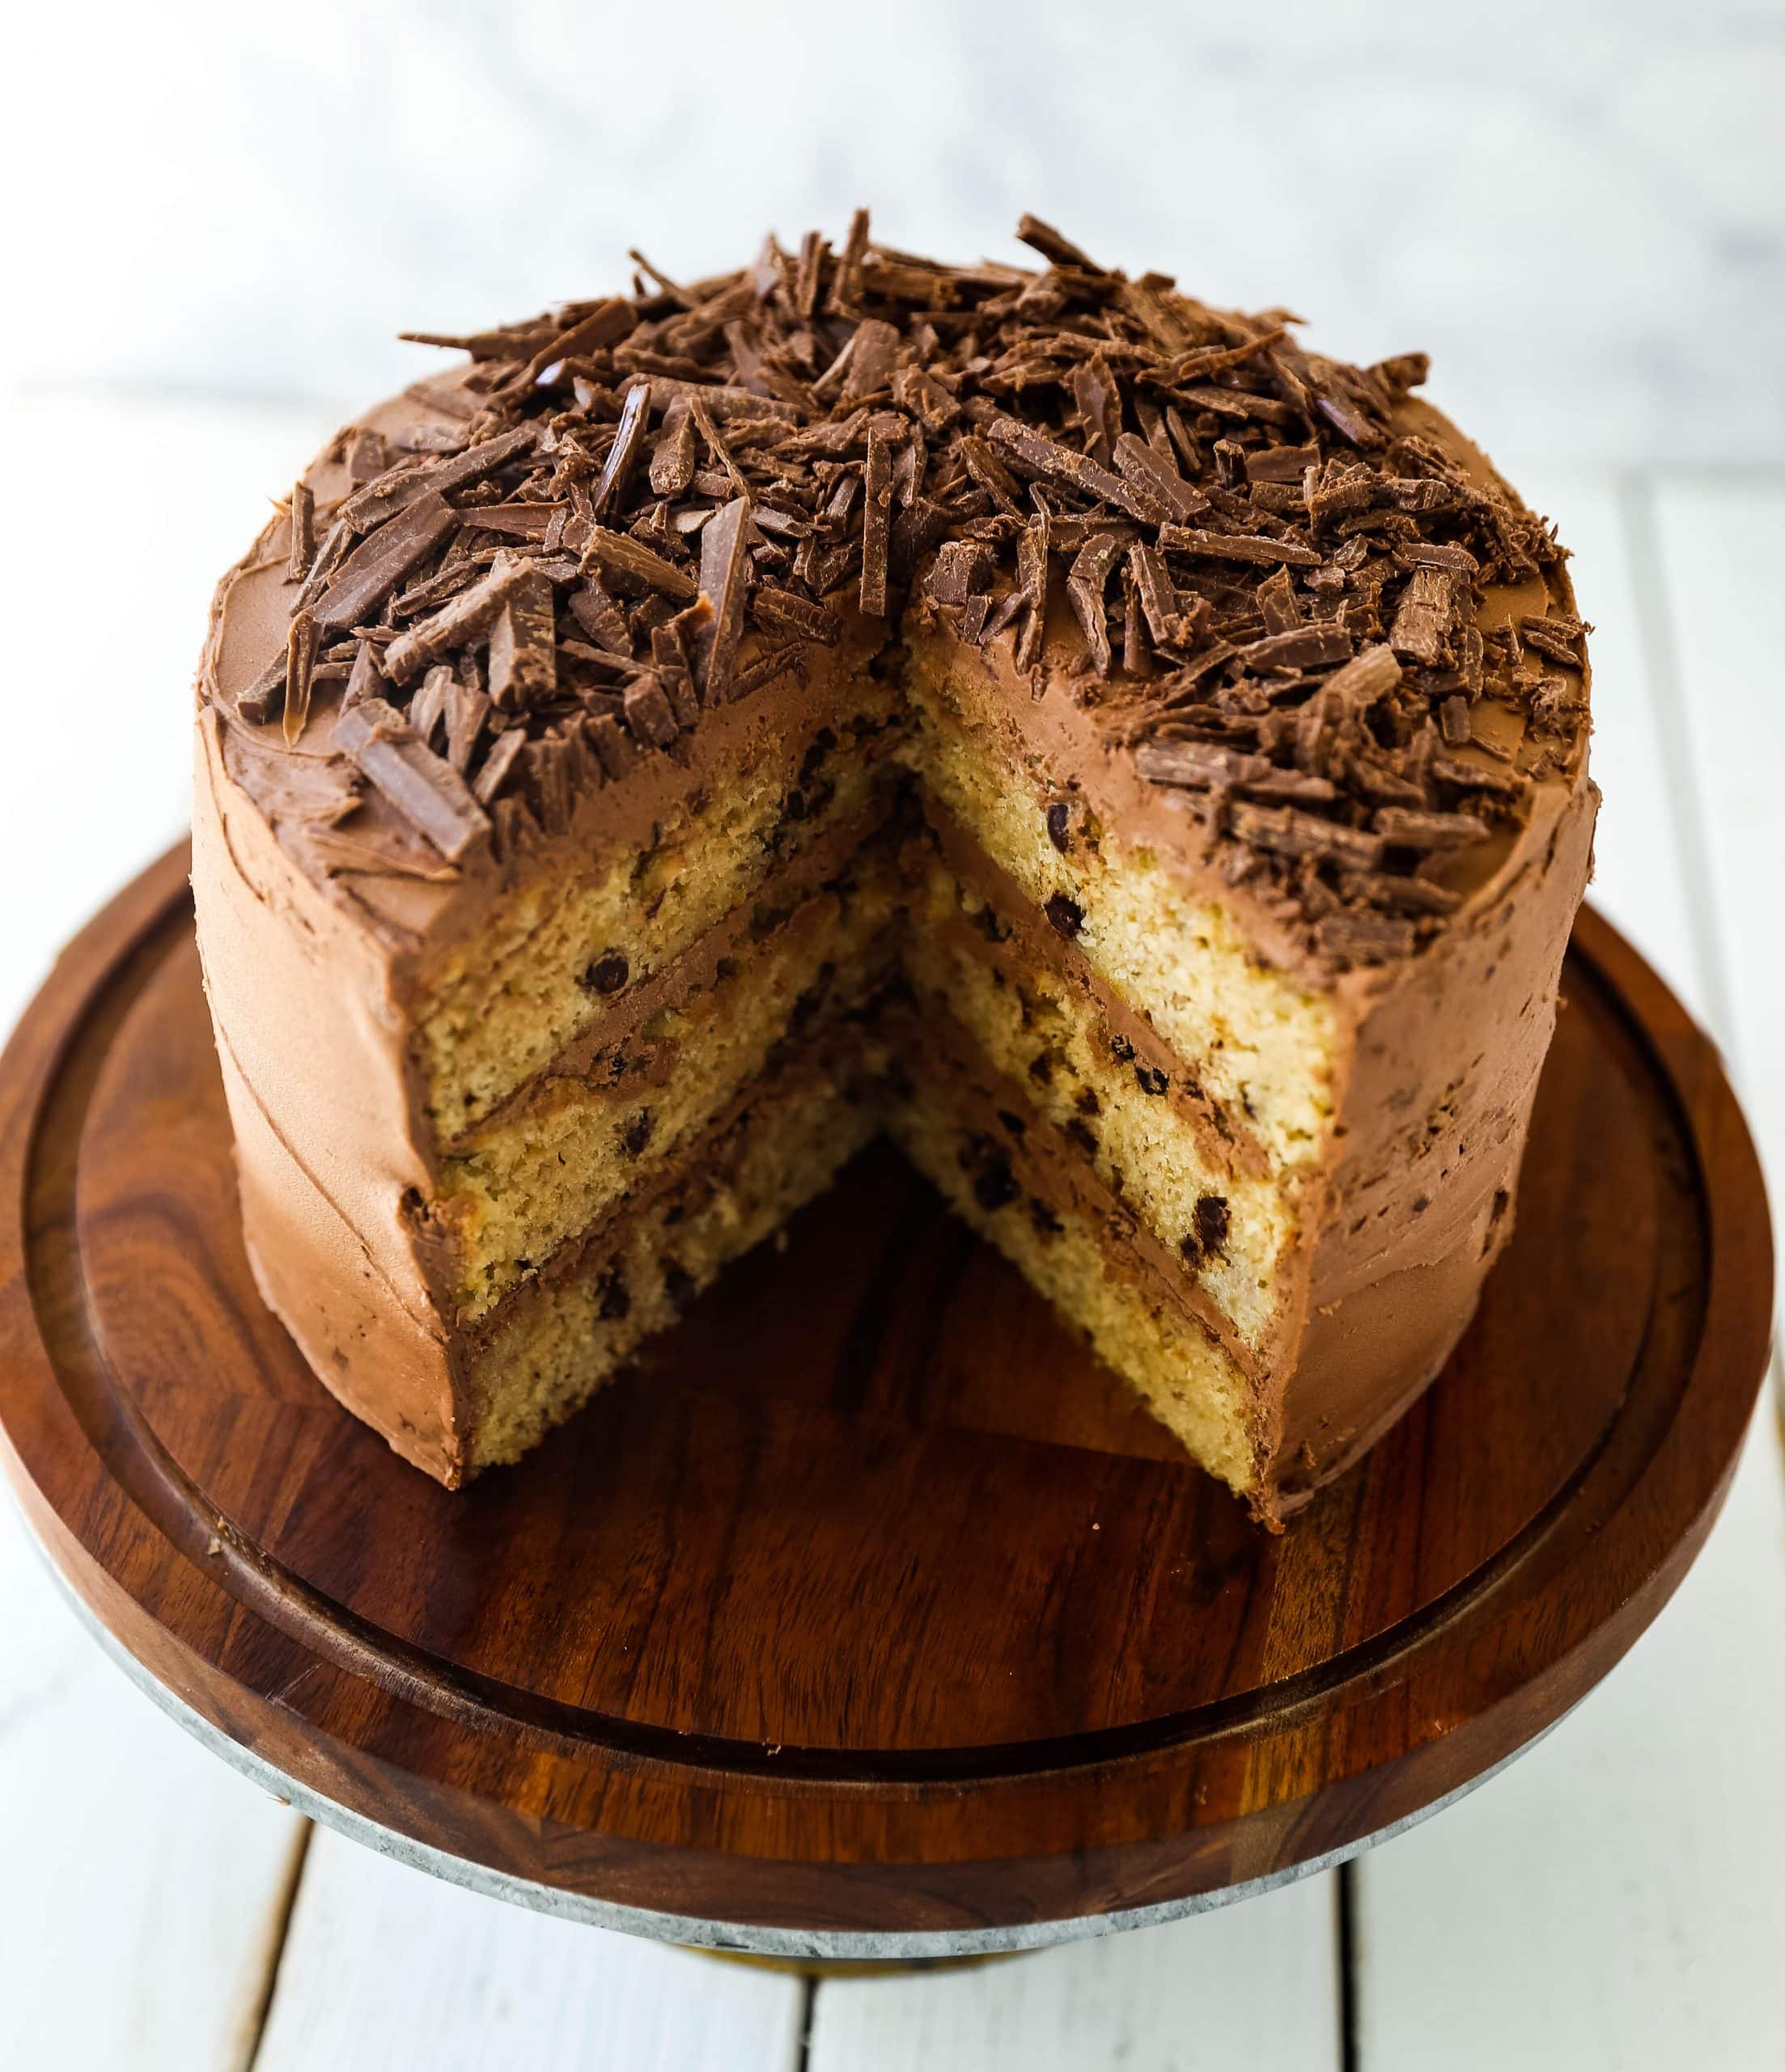 Banana Chocolate Chip Cake with Nutella Frosting. Moist banana cake studded with mini chocolate chips and topped with rich Nutella chocolate frosting. #banana #bananacake #bananachocolate #nutella